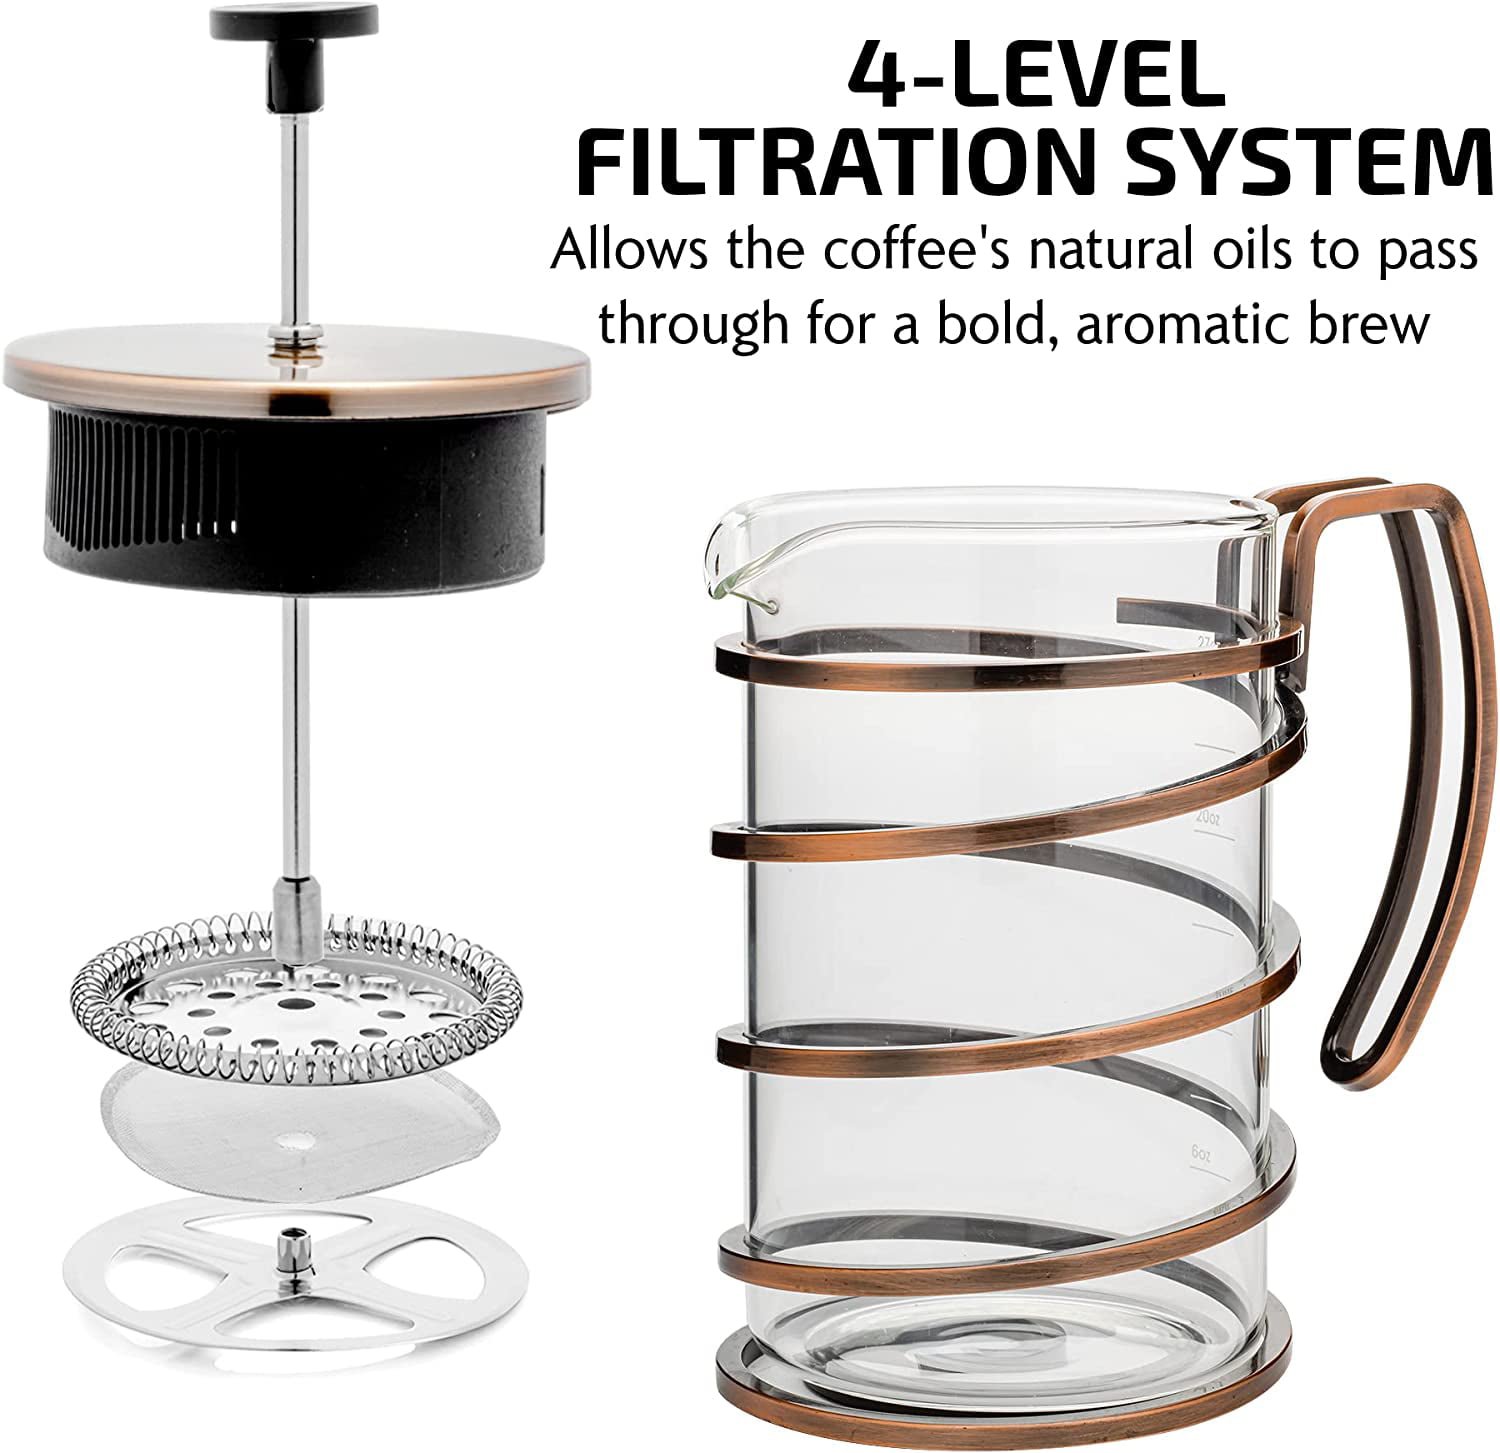 OVENTE 1.5-Cup Glass French Press Coffee and Tea Maker with Heat